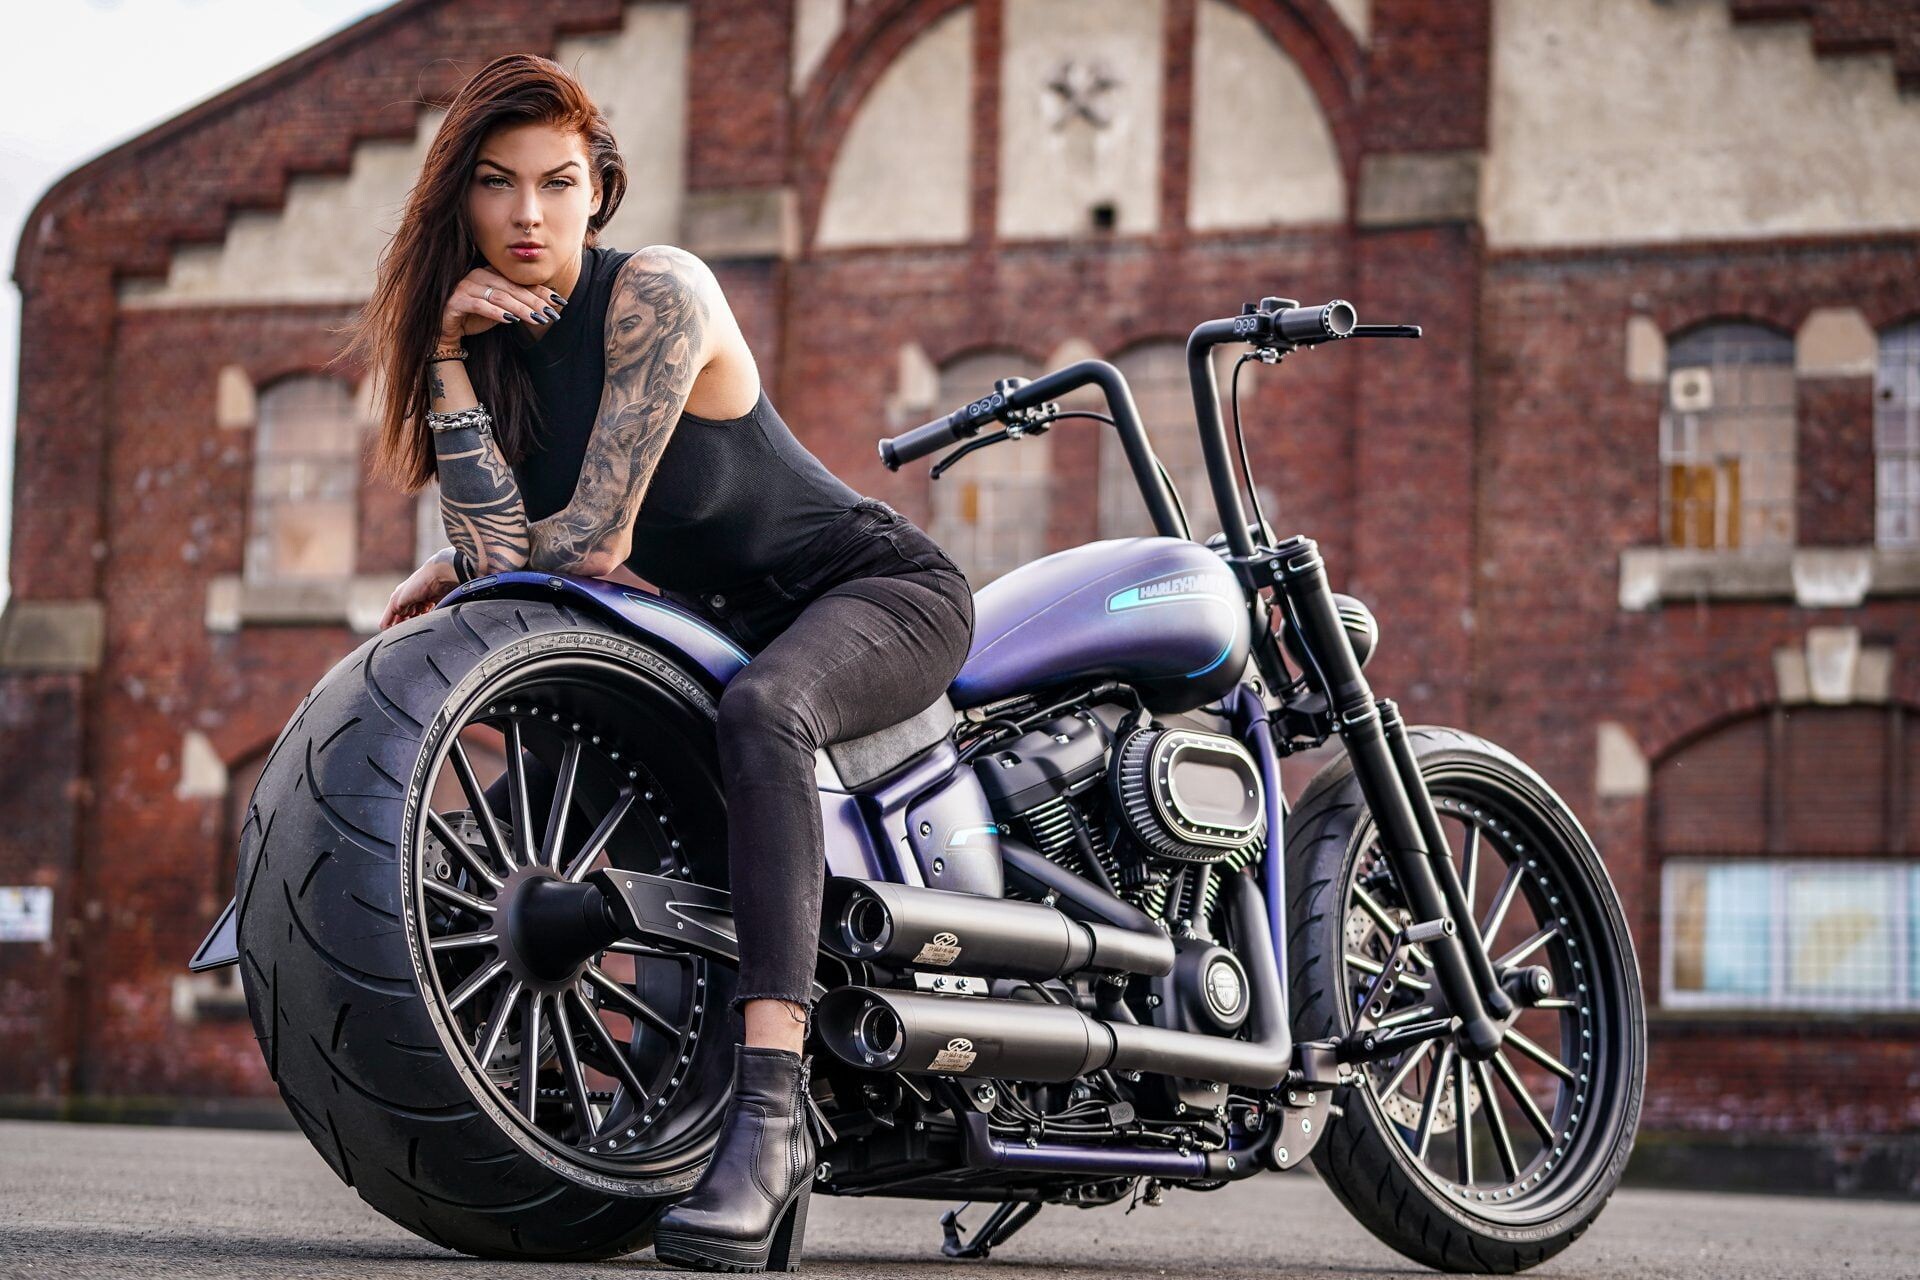 Girls and Motorcycles: Harley-Davidson, Thunderbike Customs, Motorcycle touring, Riding technique. 1920x1280 HD Wallpaper.